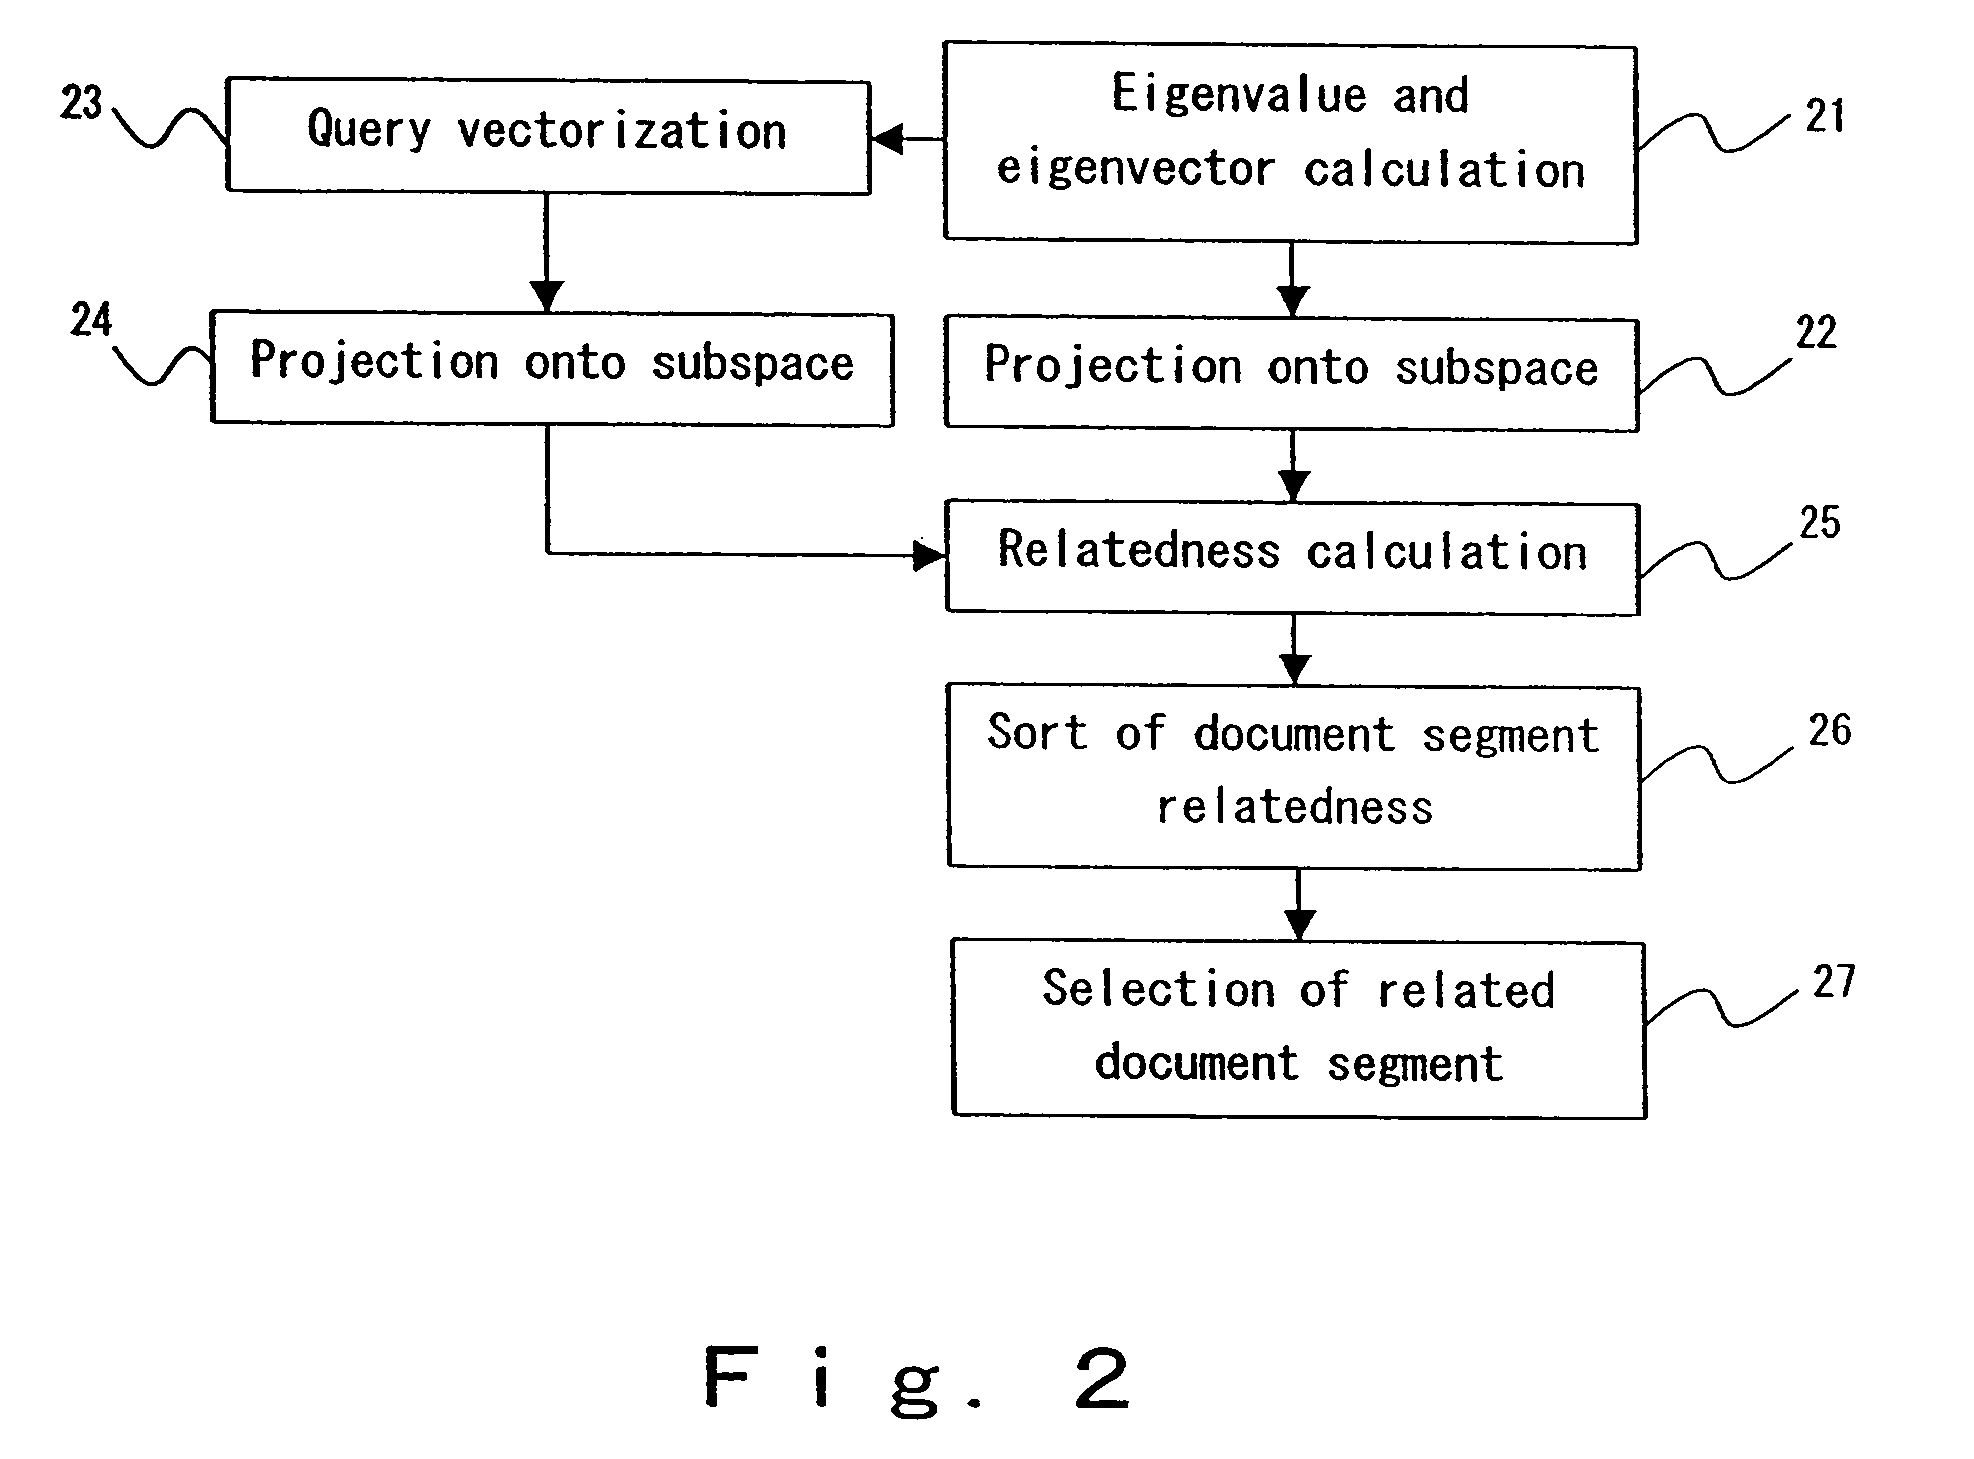 Method of vector analysis for a document